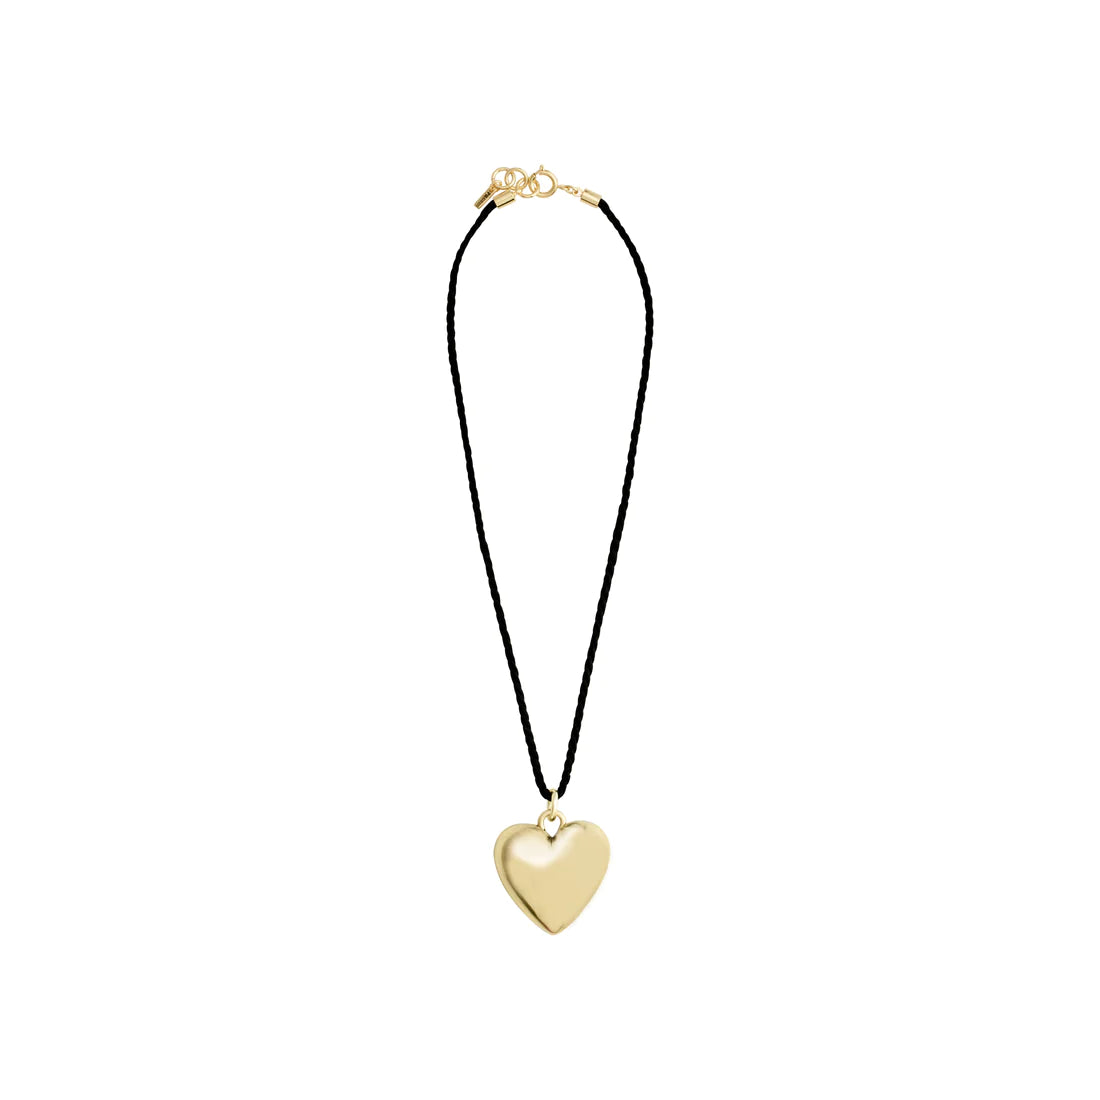 Reflect Recycled Heart Necklace Gold- or Silver-Plated